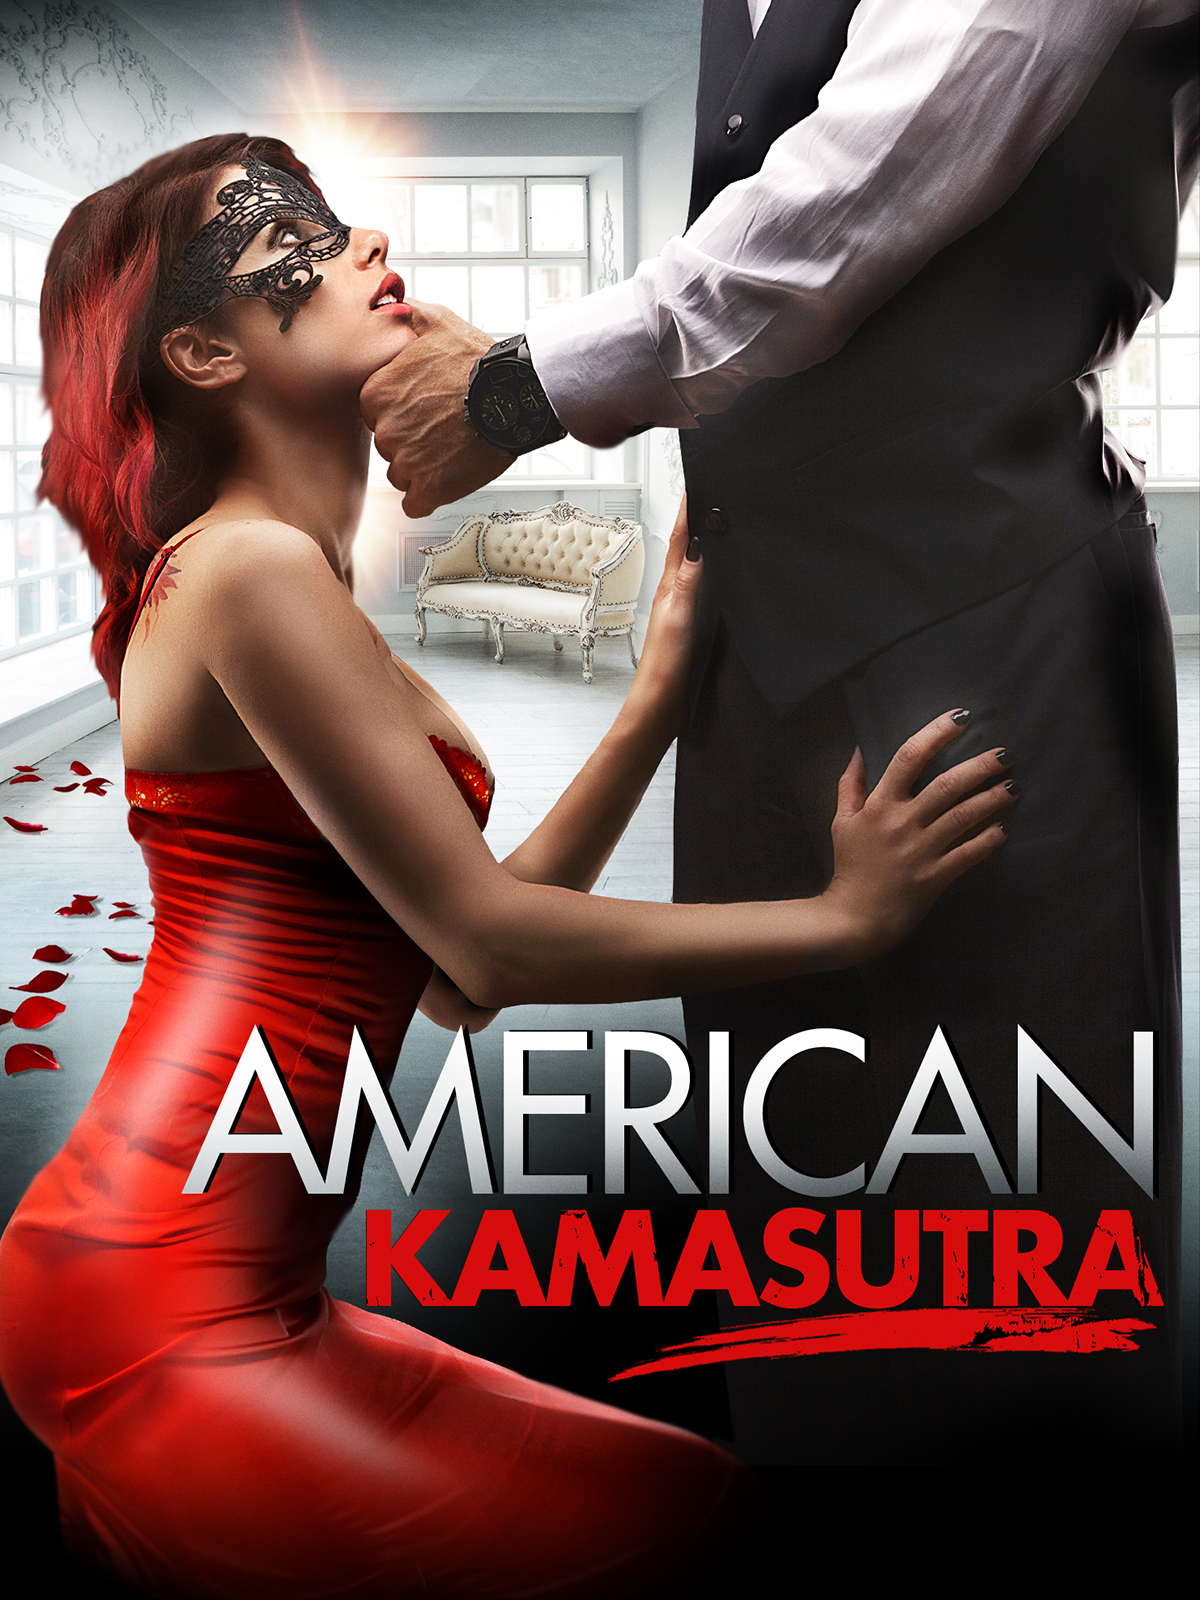 Kamasutra The Tale Of Love Torrent Download